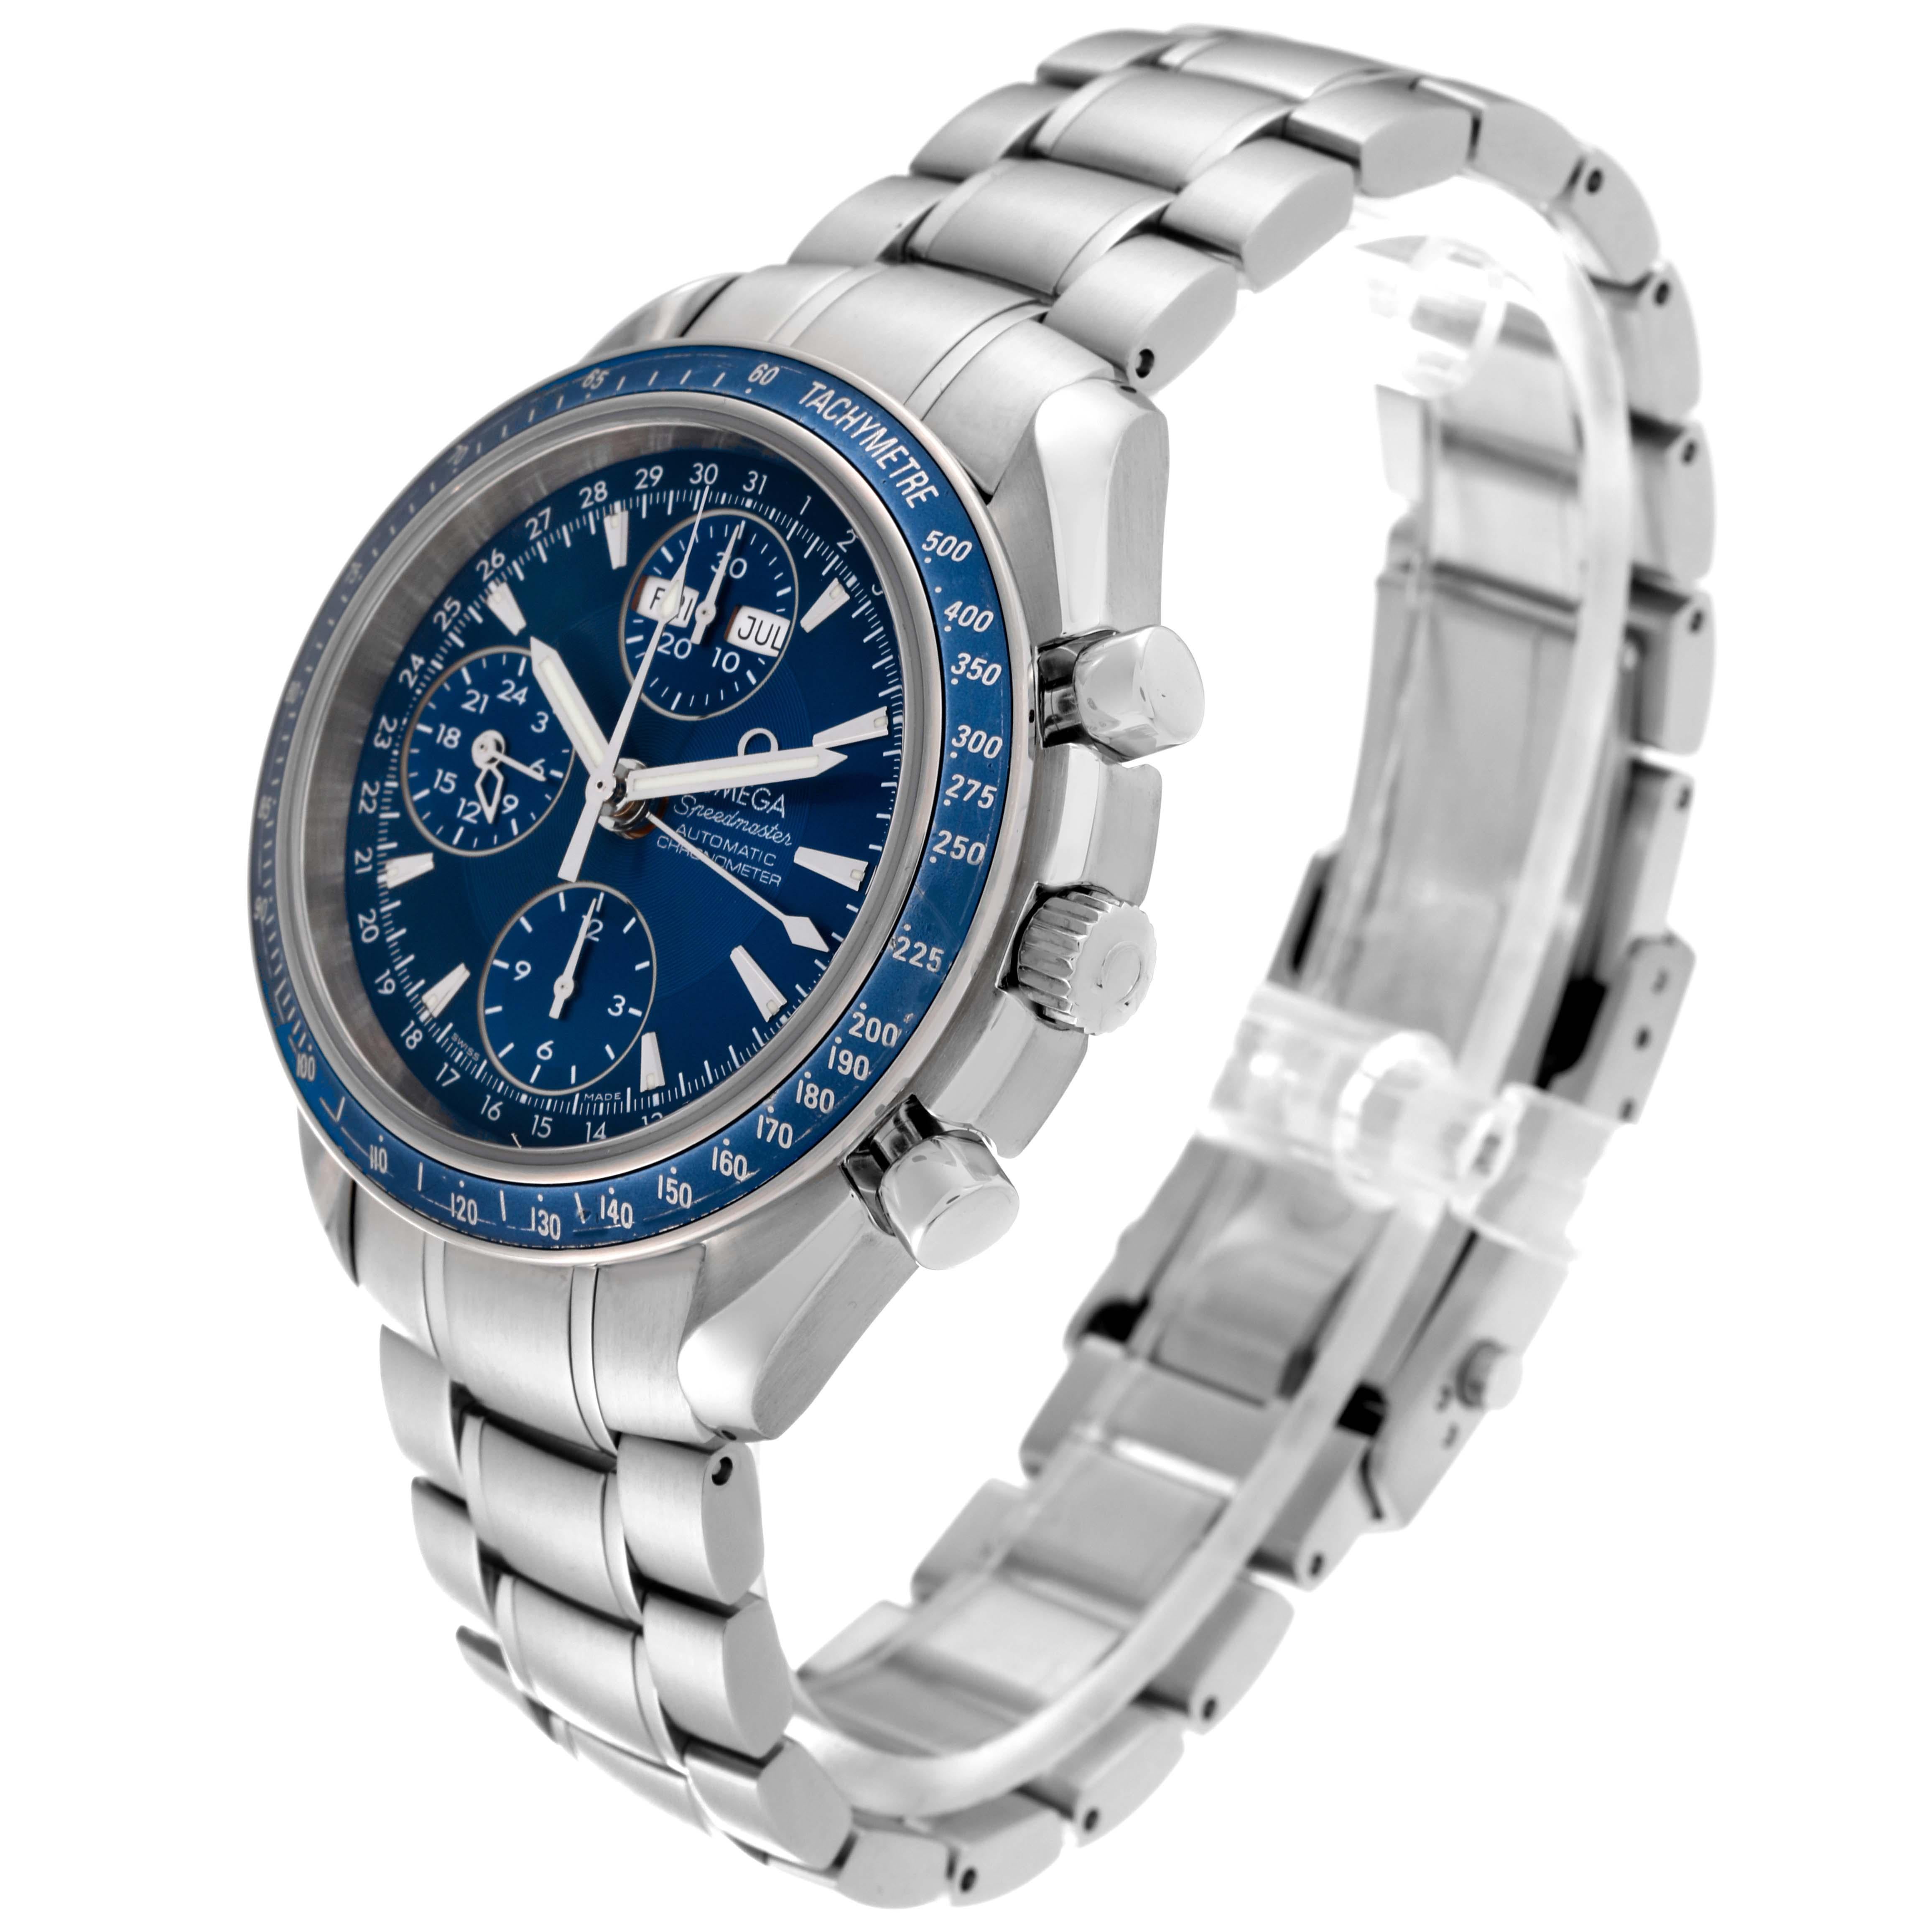 Omega Speedmaster Day Date Blue Dial Chronograph Steel Mens Watch 3222.80.00 For Sale 2